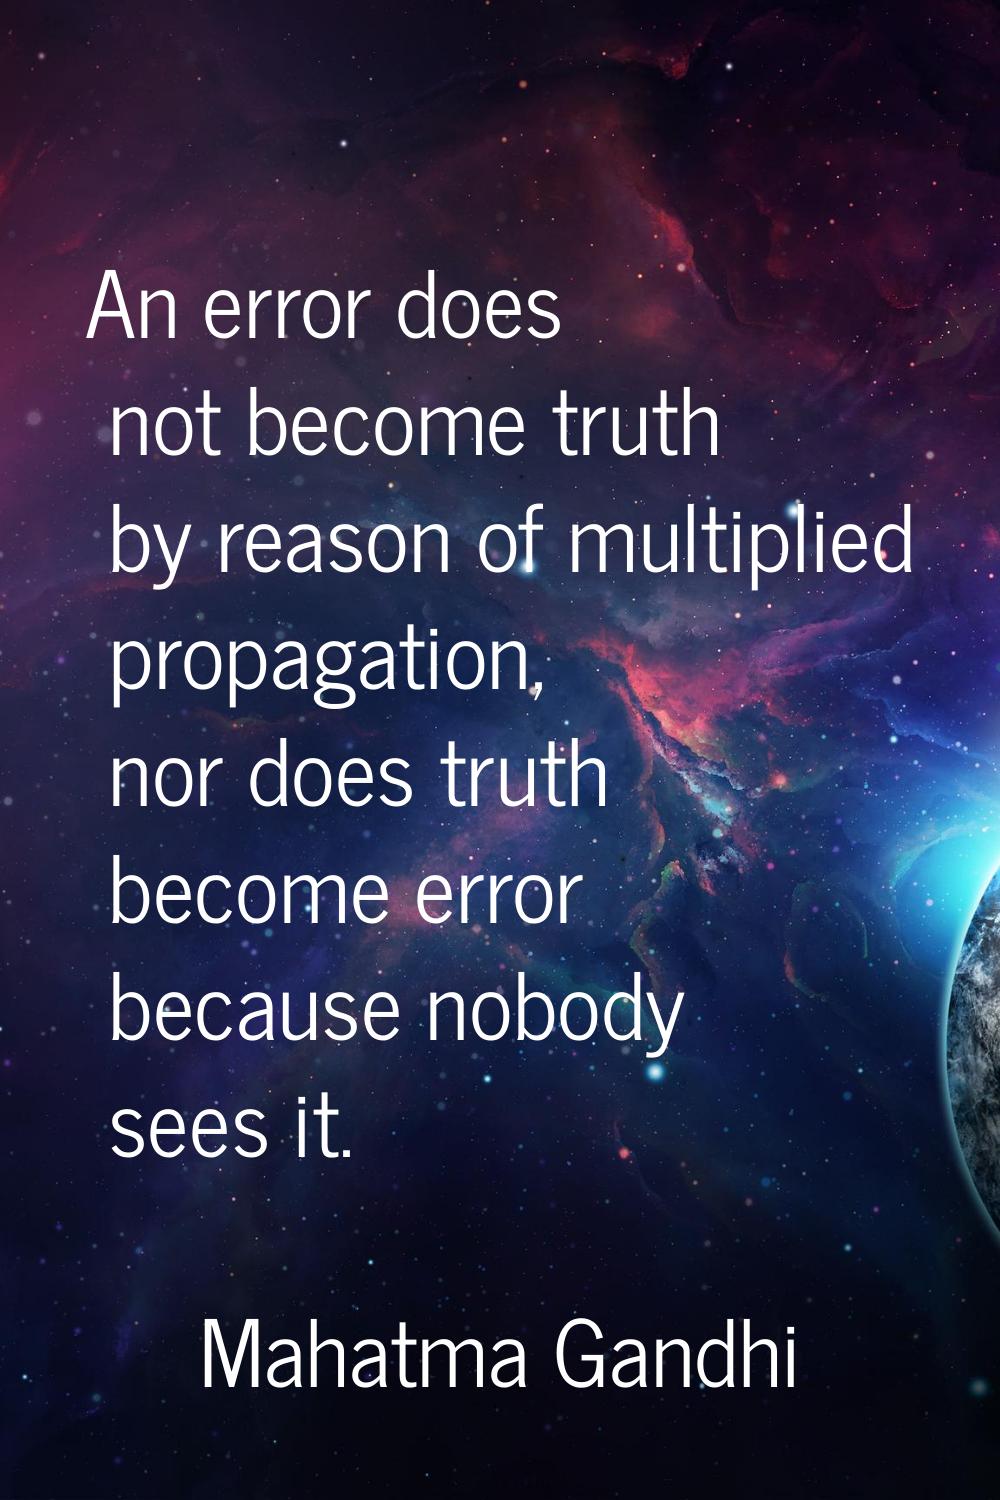 An error does not become truth by reason of multiplied propagation, nor does truth become error bec